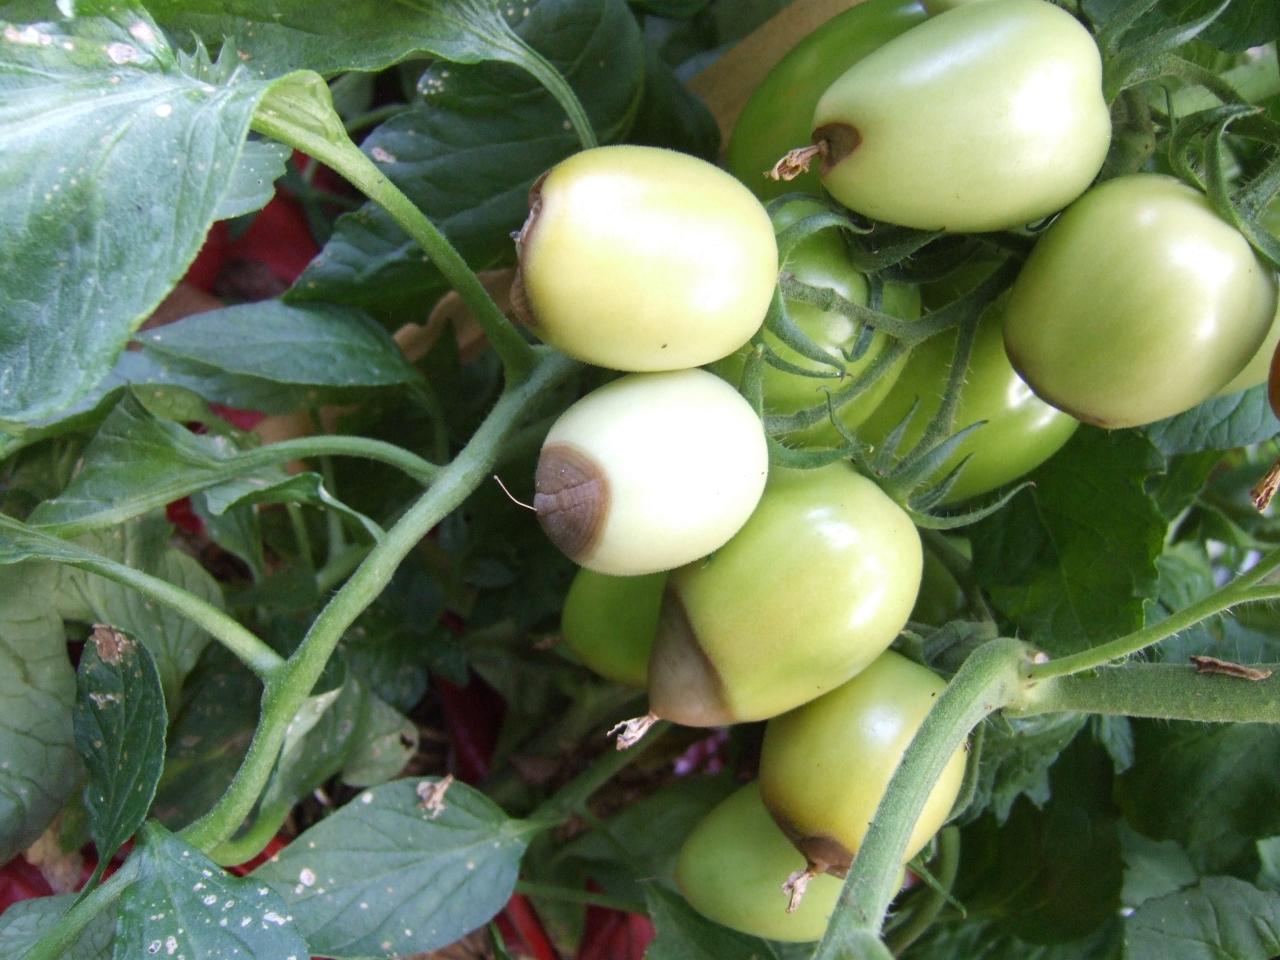 How To Reduce Blossom End Rot in Container Grown Tomatoes: Use Cal-Mag+ with Care & Attention